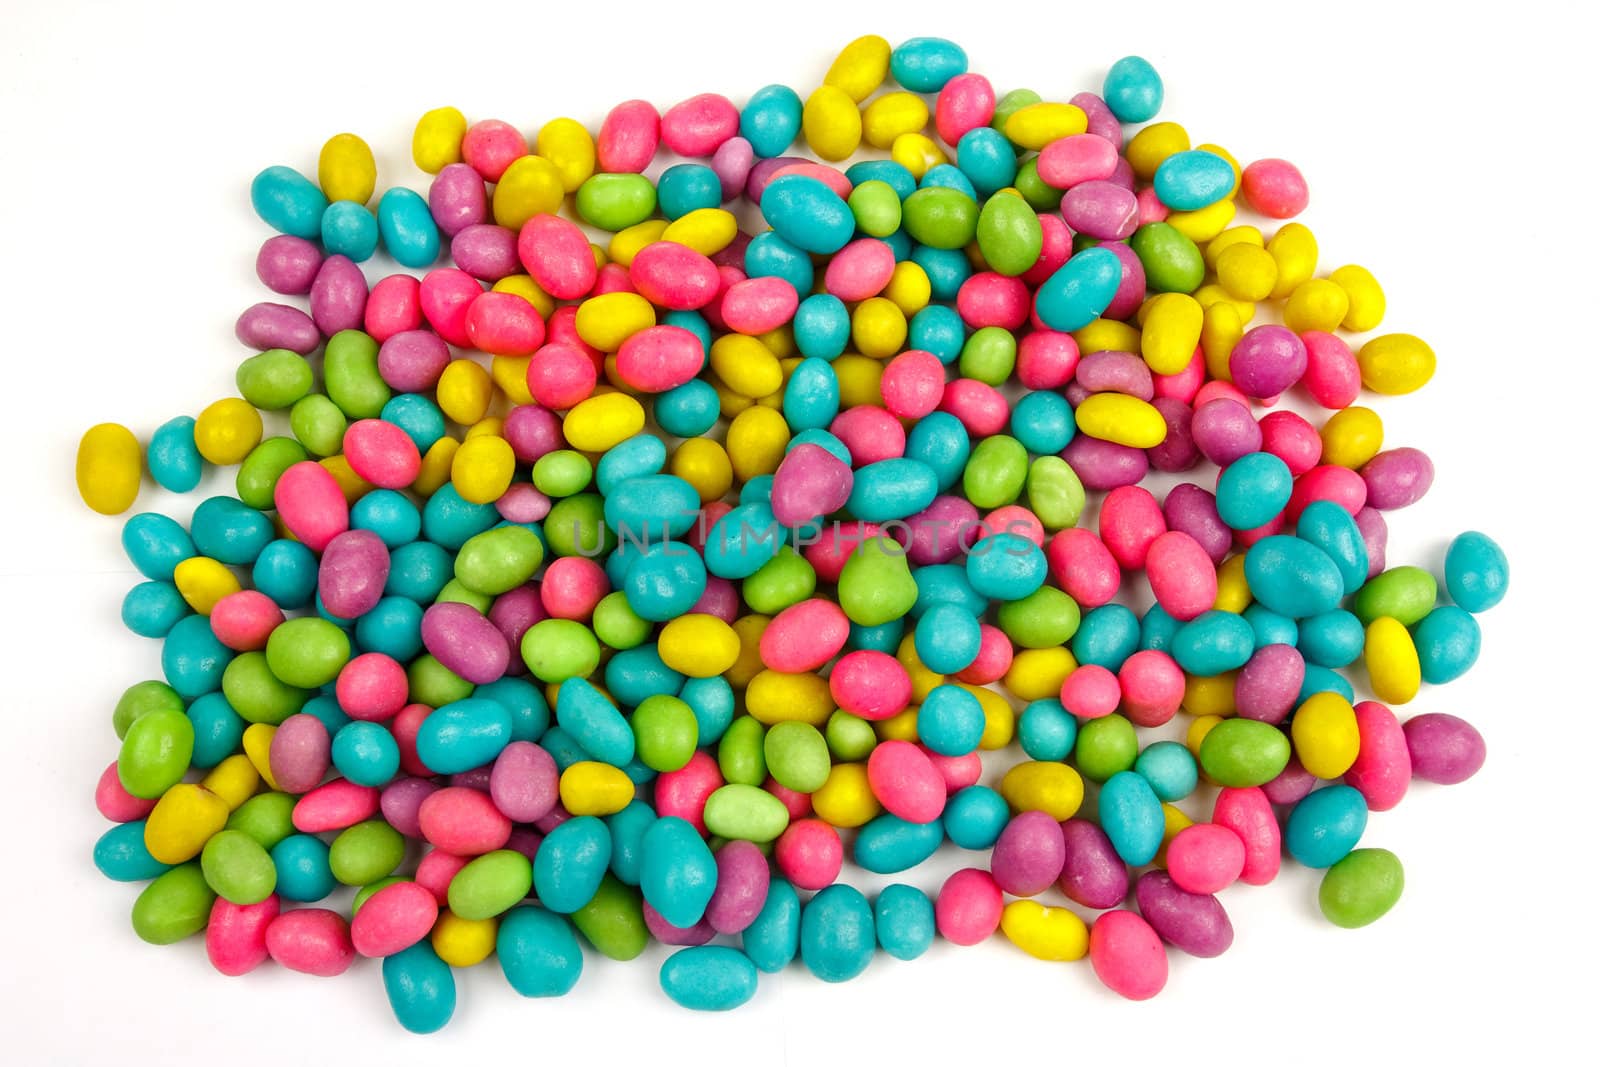 Color candies beans background